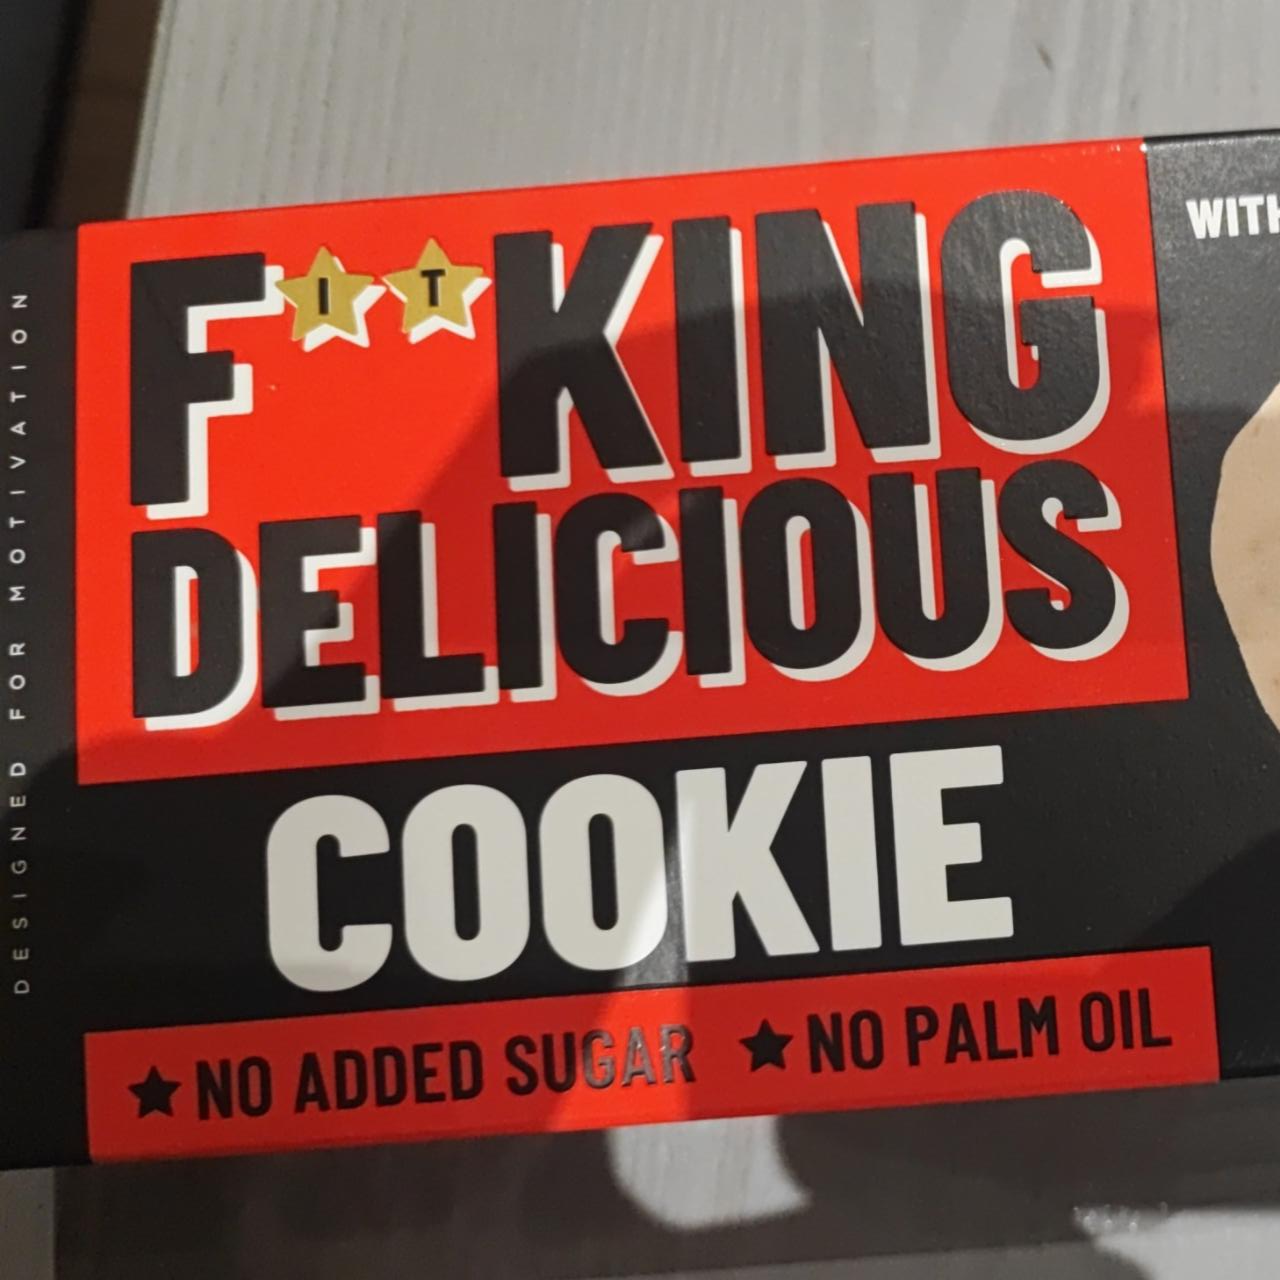 Fotografie - Fitking Delicious Cookie Allnutrition